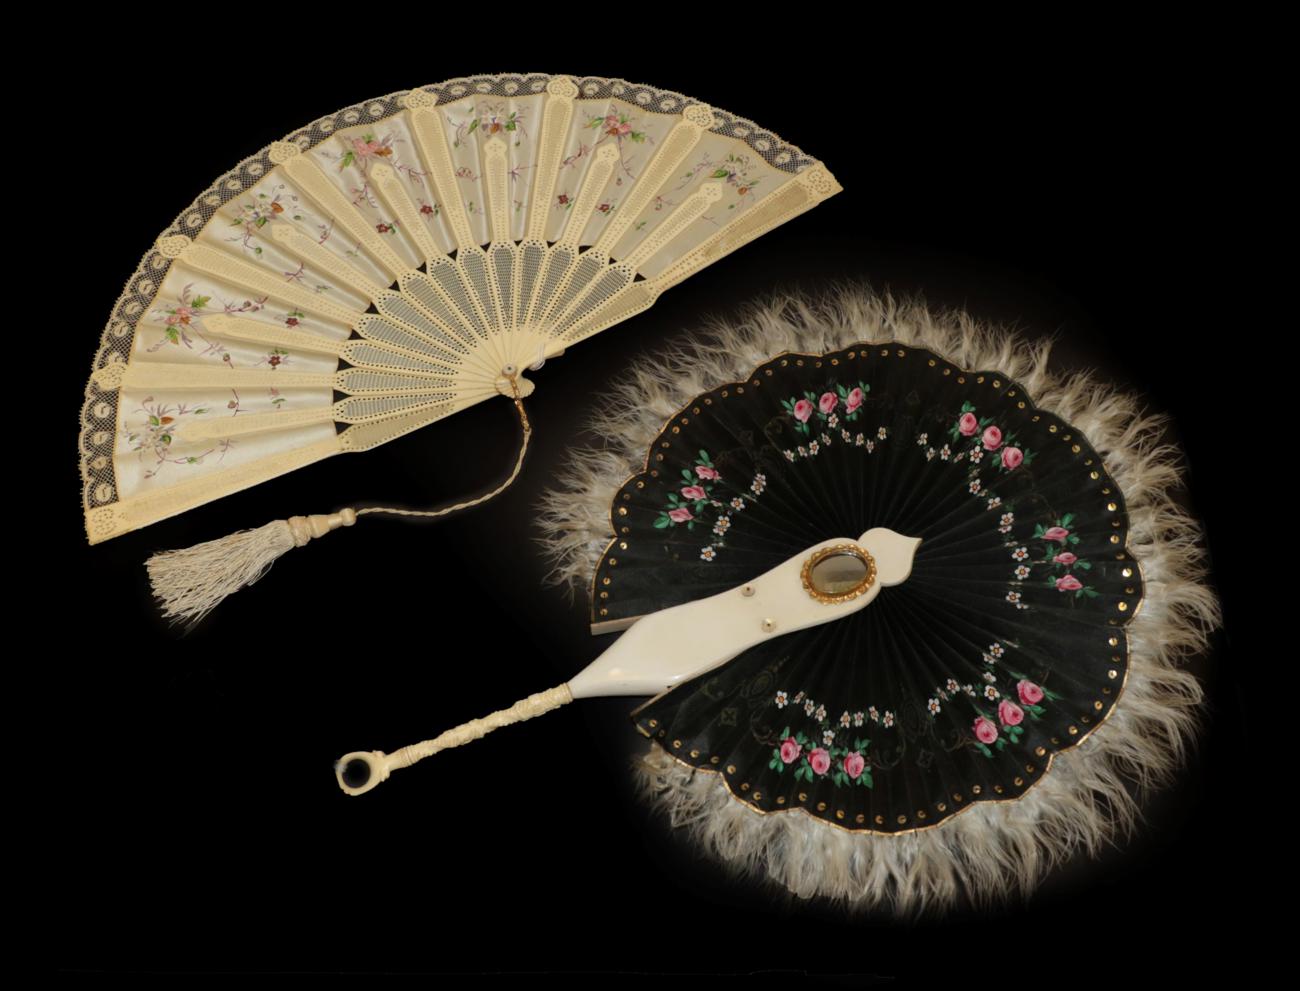 Lot 4074 - Two Very Feminine Fans of differing forms, the first, circa 1900, a bone fan of the type considered